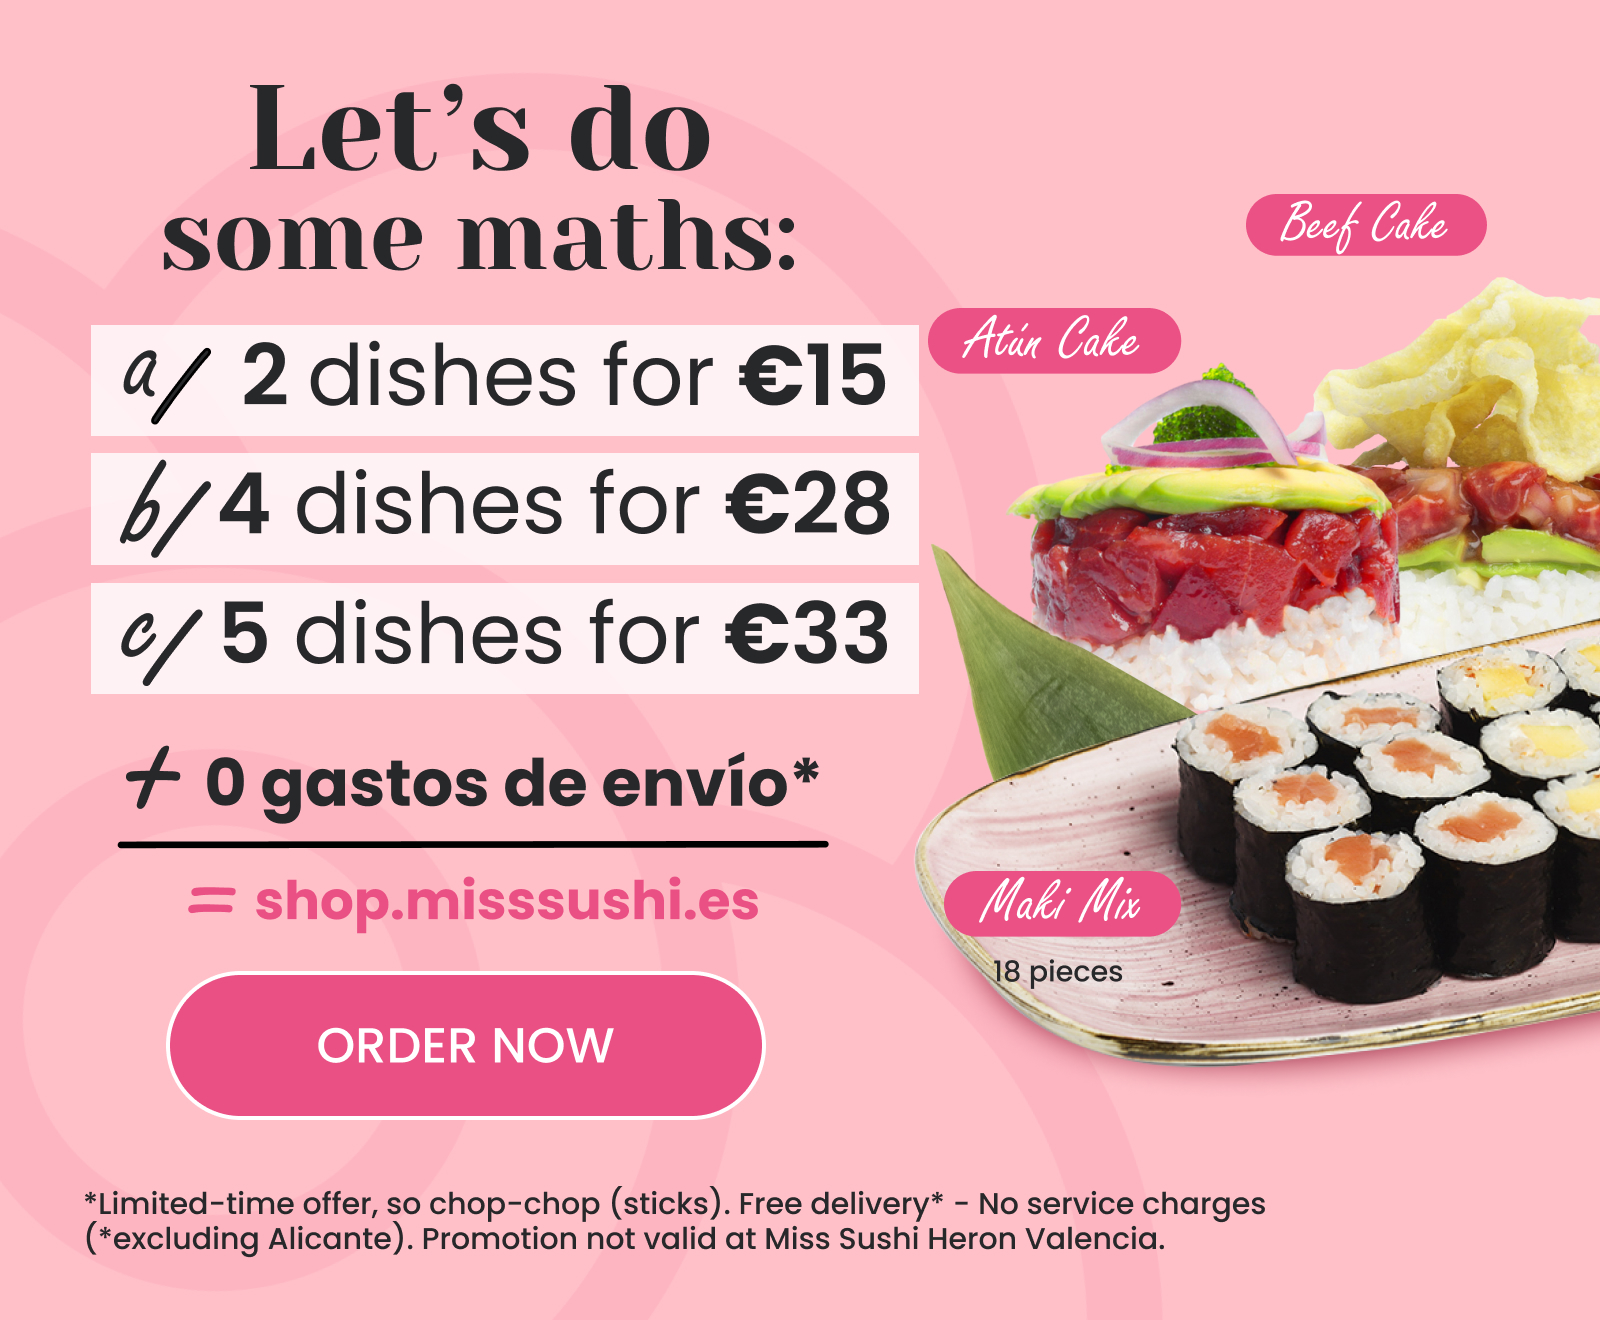 We say they are delicious, enjoy the Miss Sushi equation!